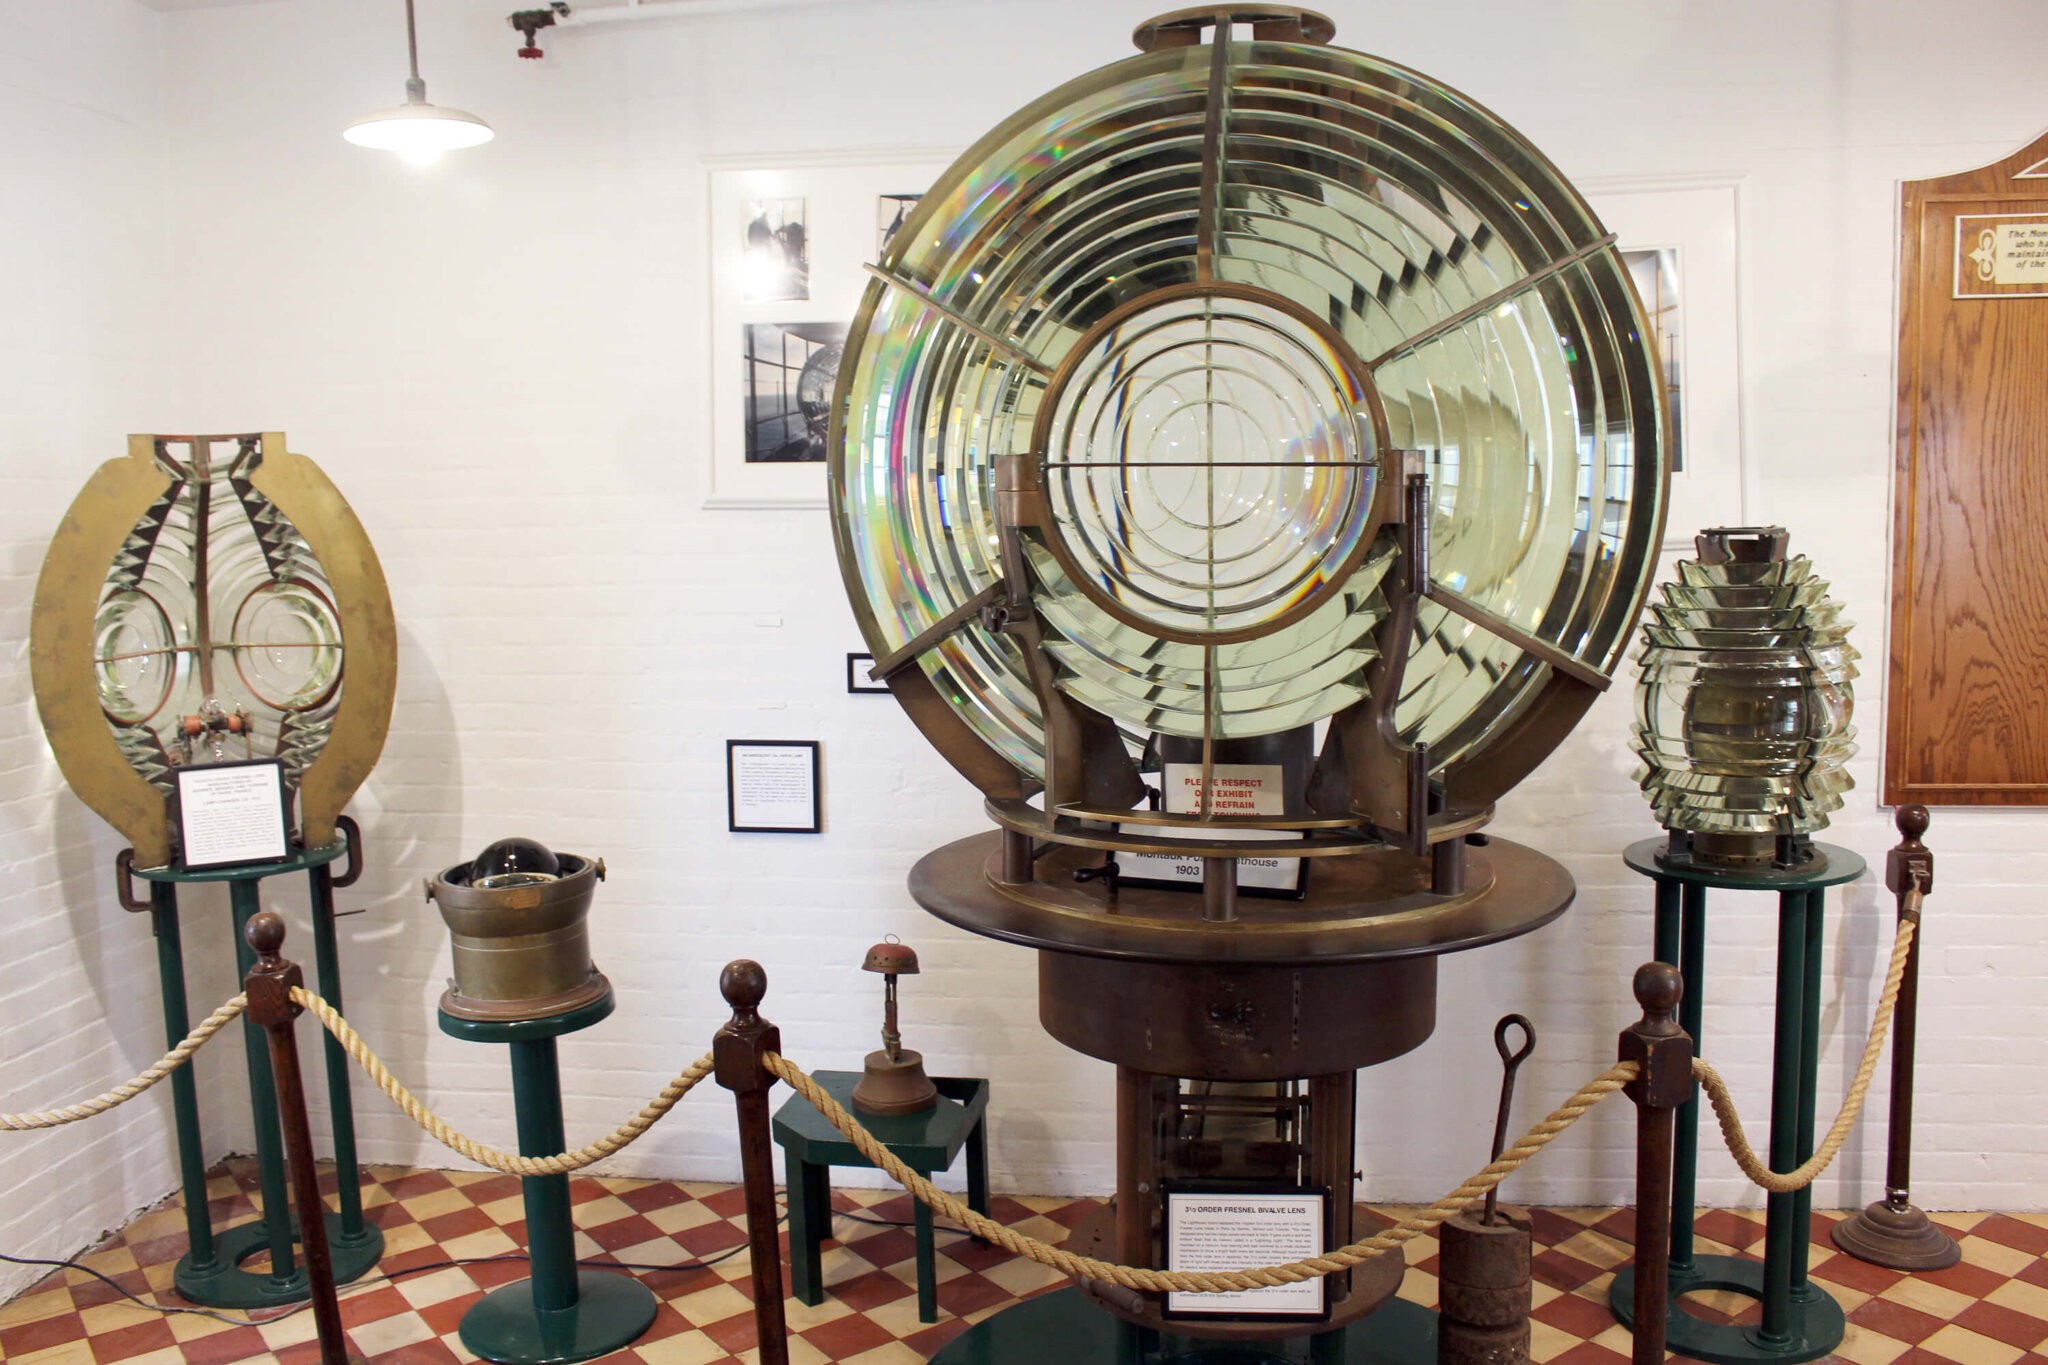 The Fresnel lens that served as the Montauk Lighthouse beacon for 84 years, from 1903-1987,